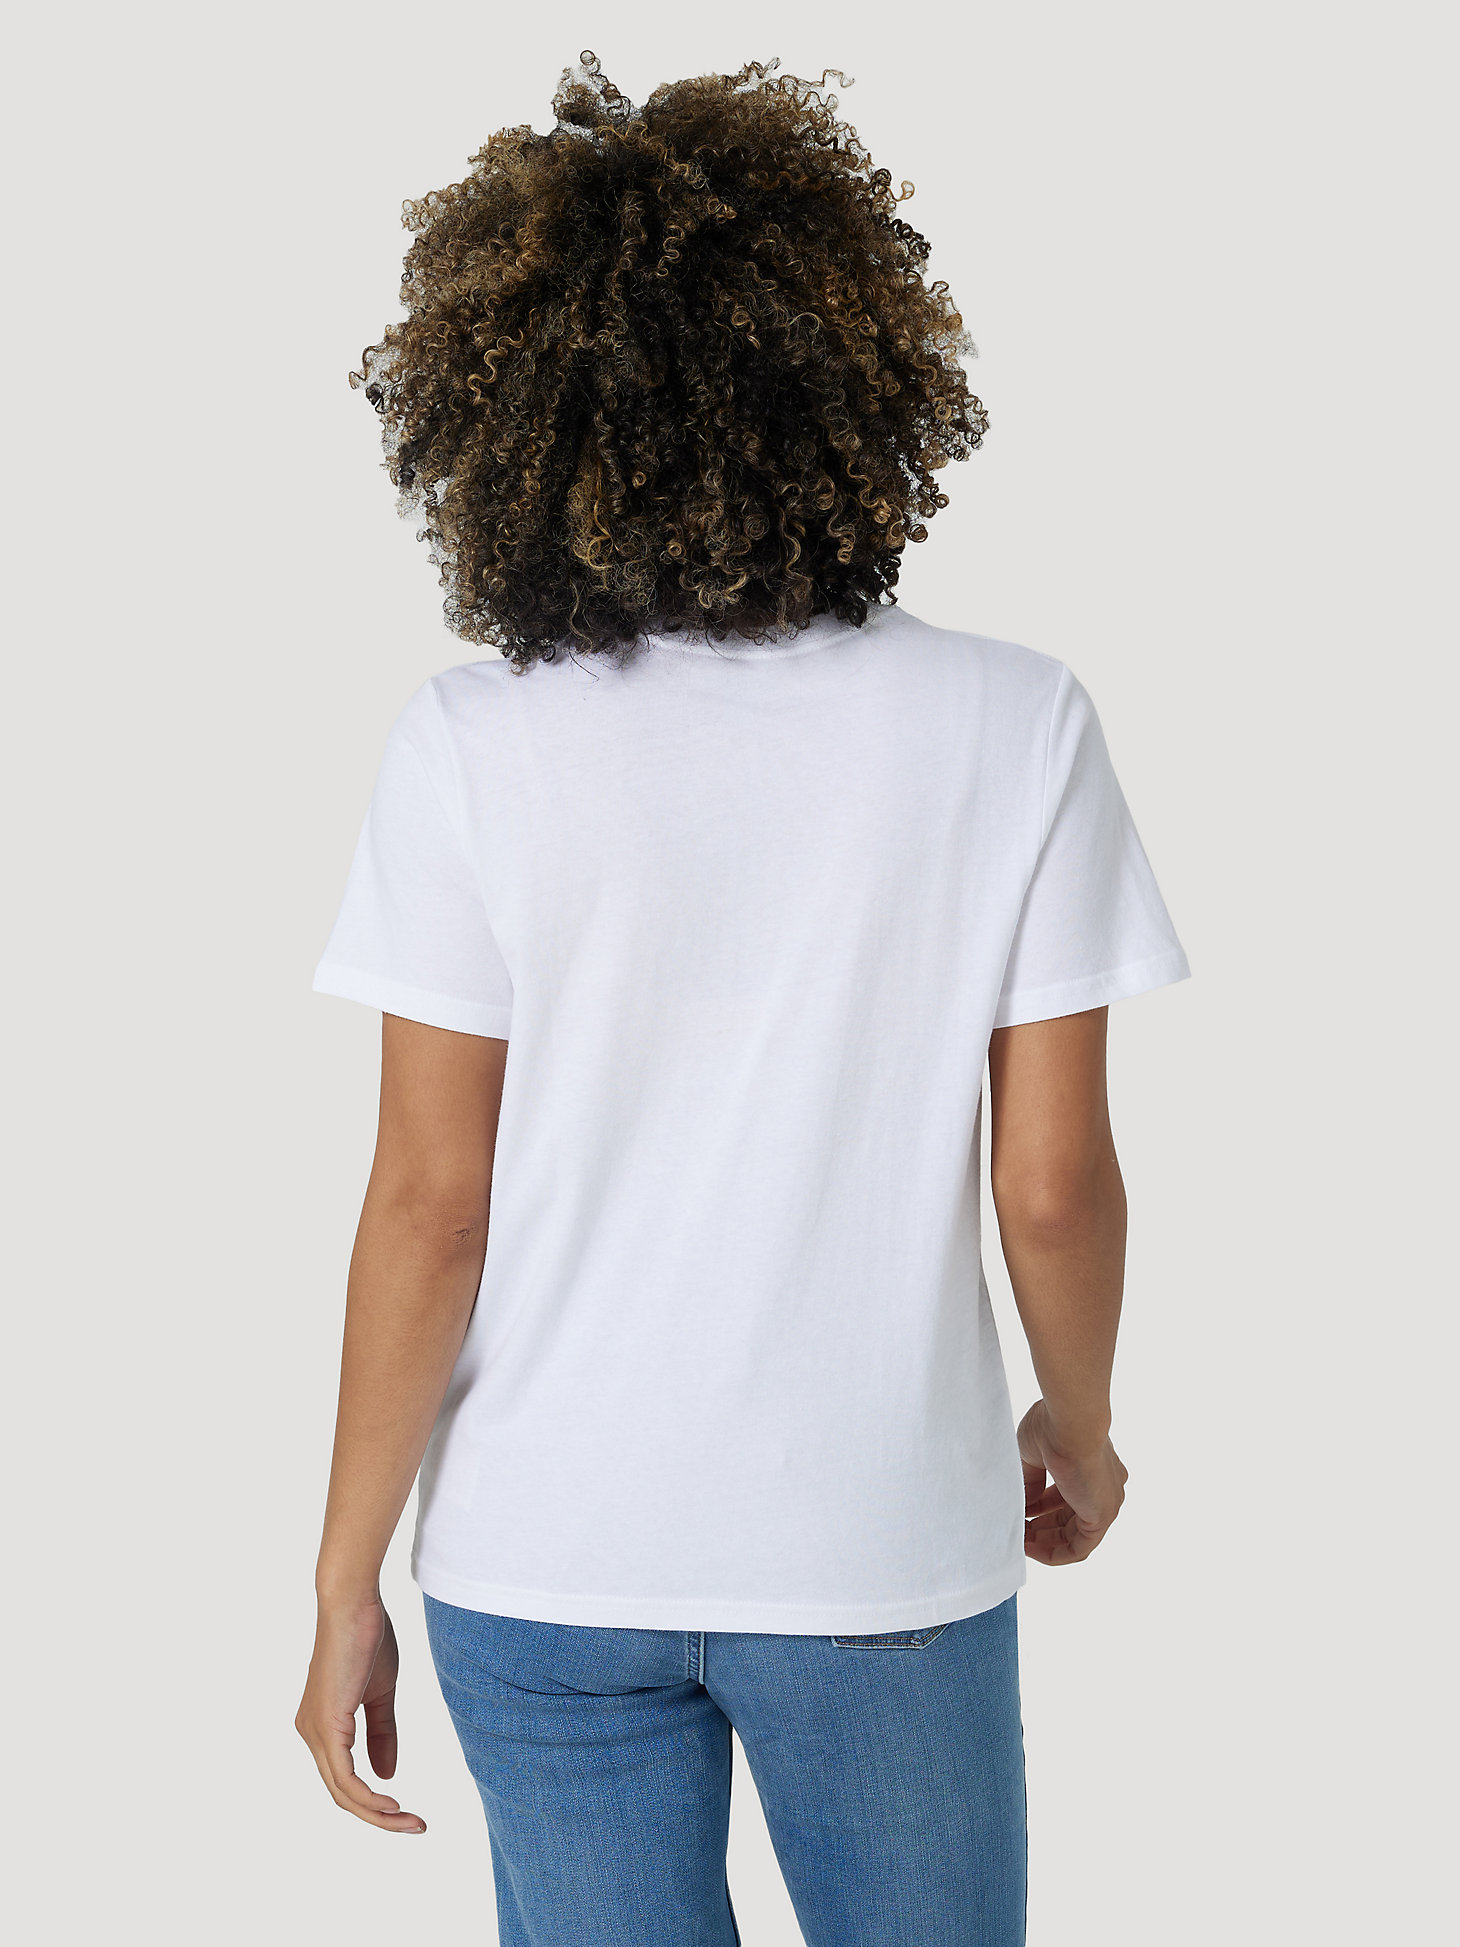 Women's Rodeo Poster Tee in Bright White alternative view 2